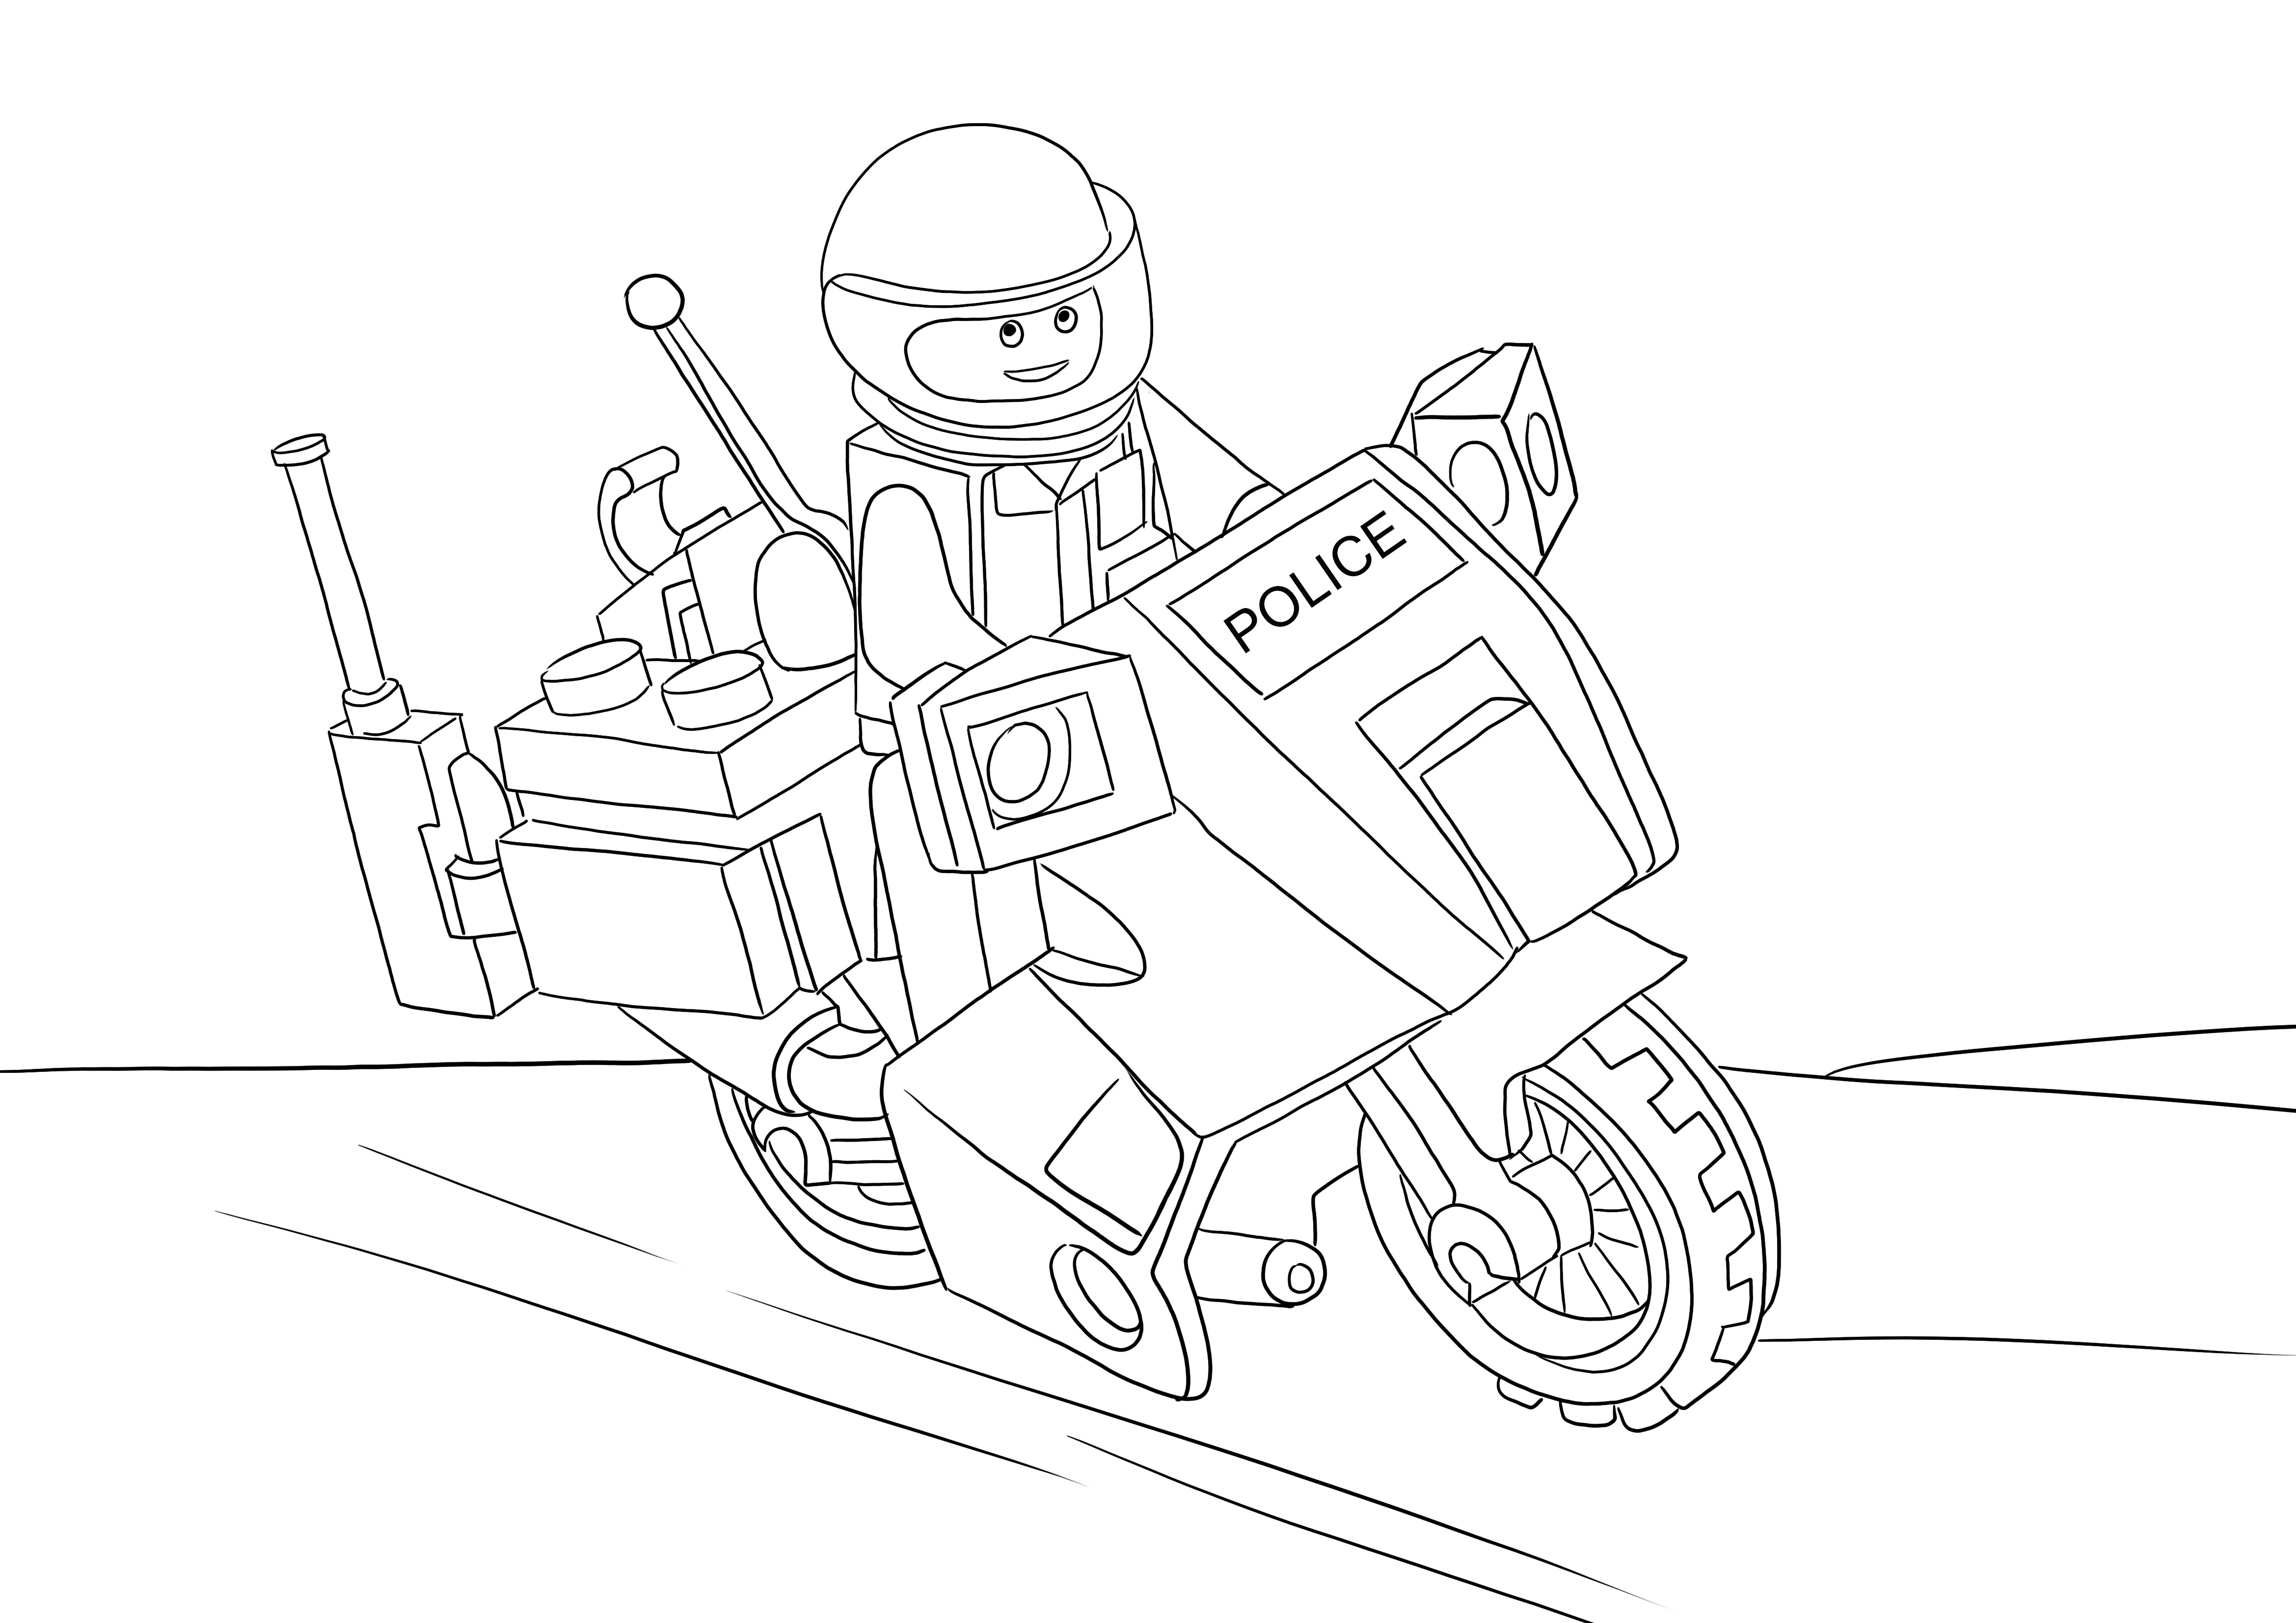 Lego Moto Police for free downloading page and coloring for kids